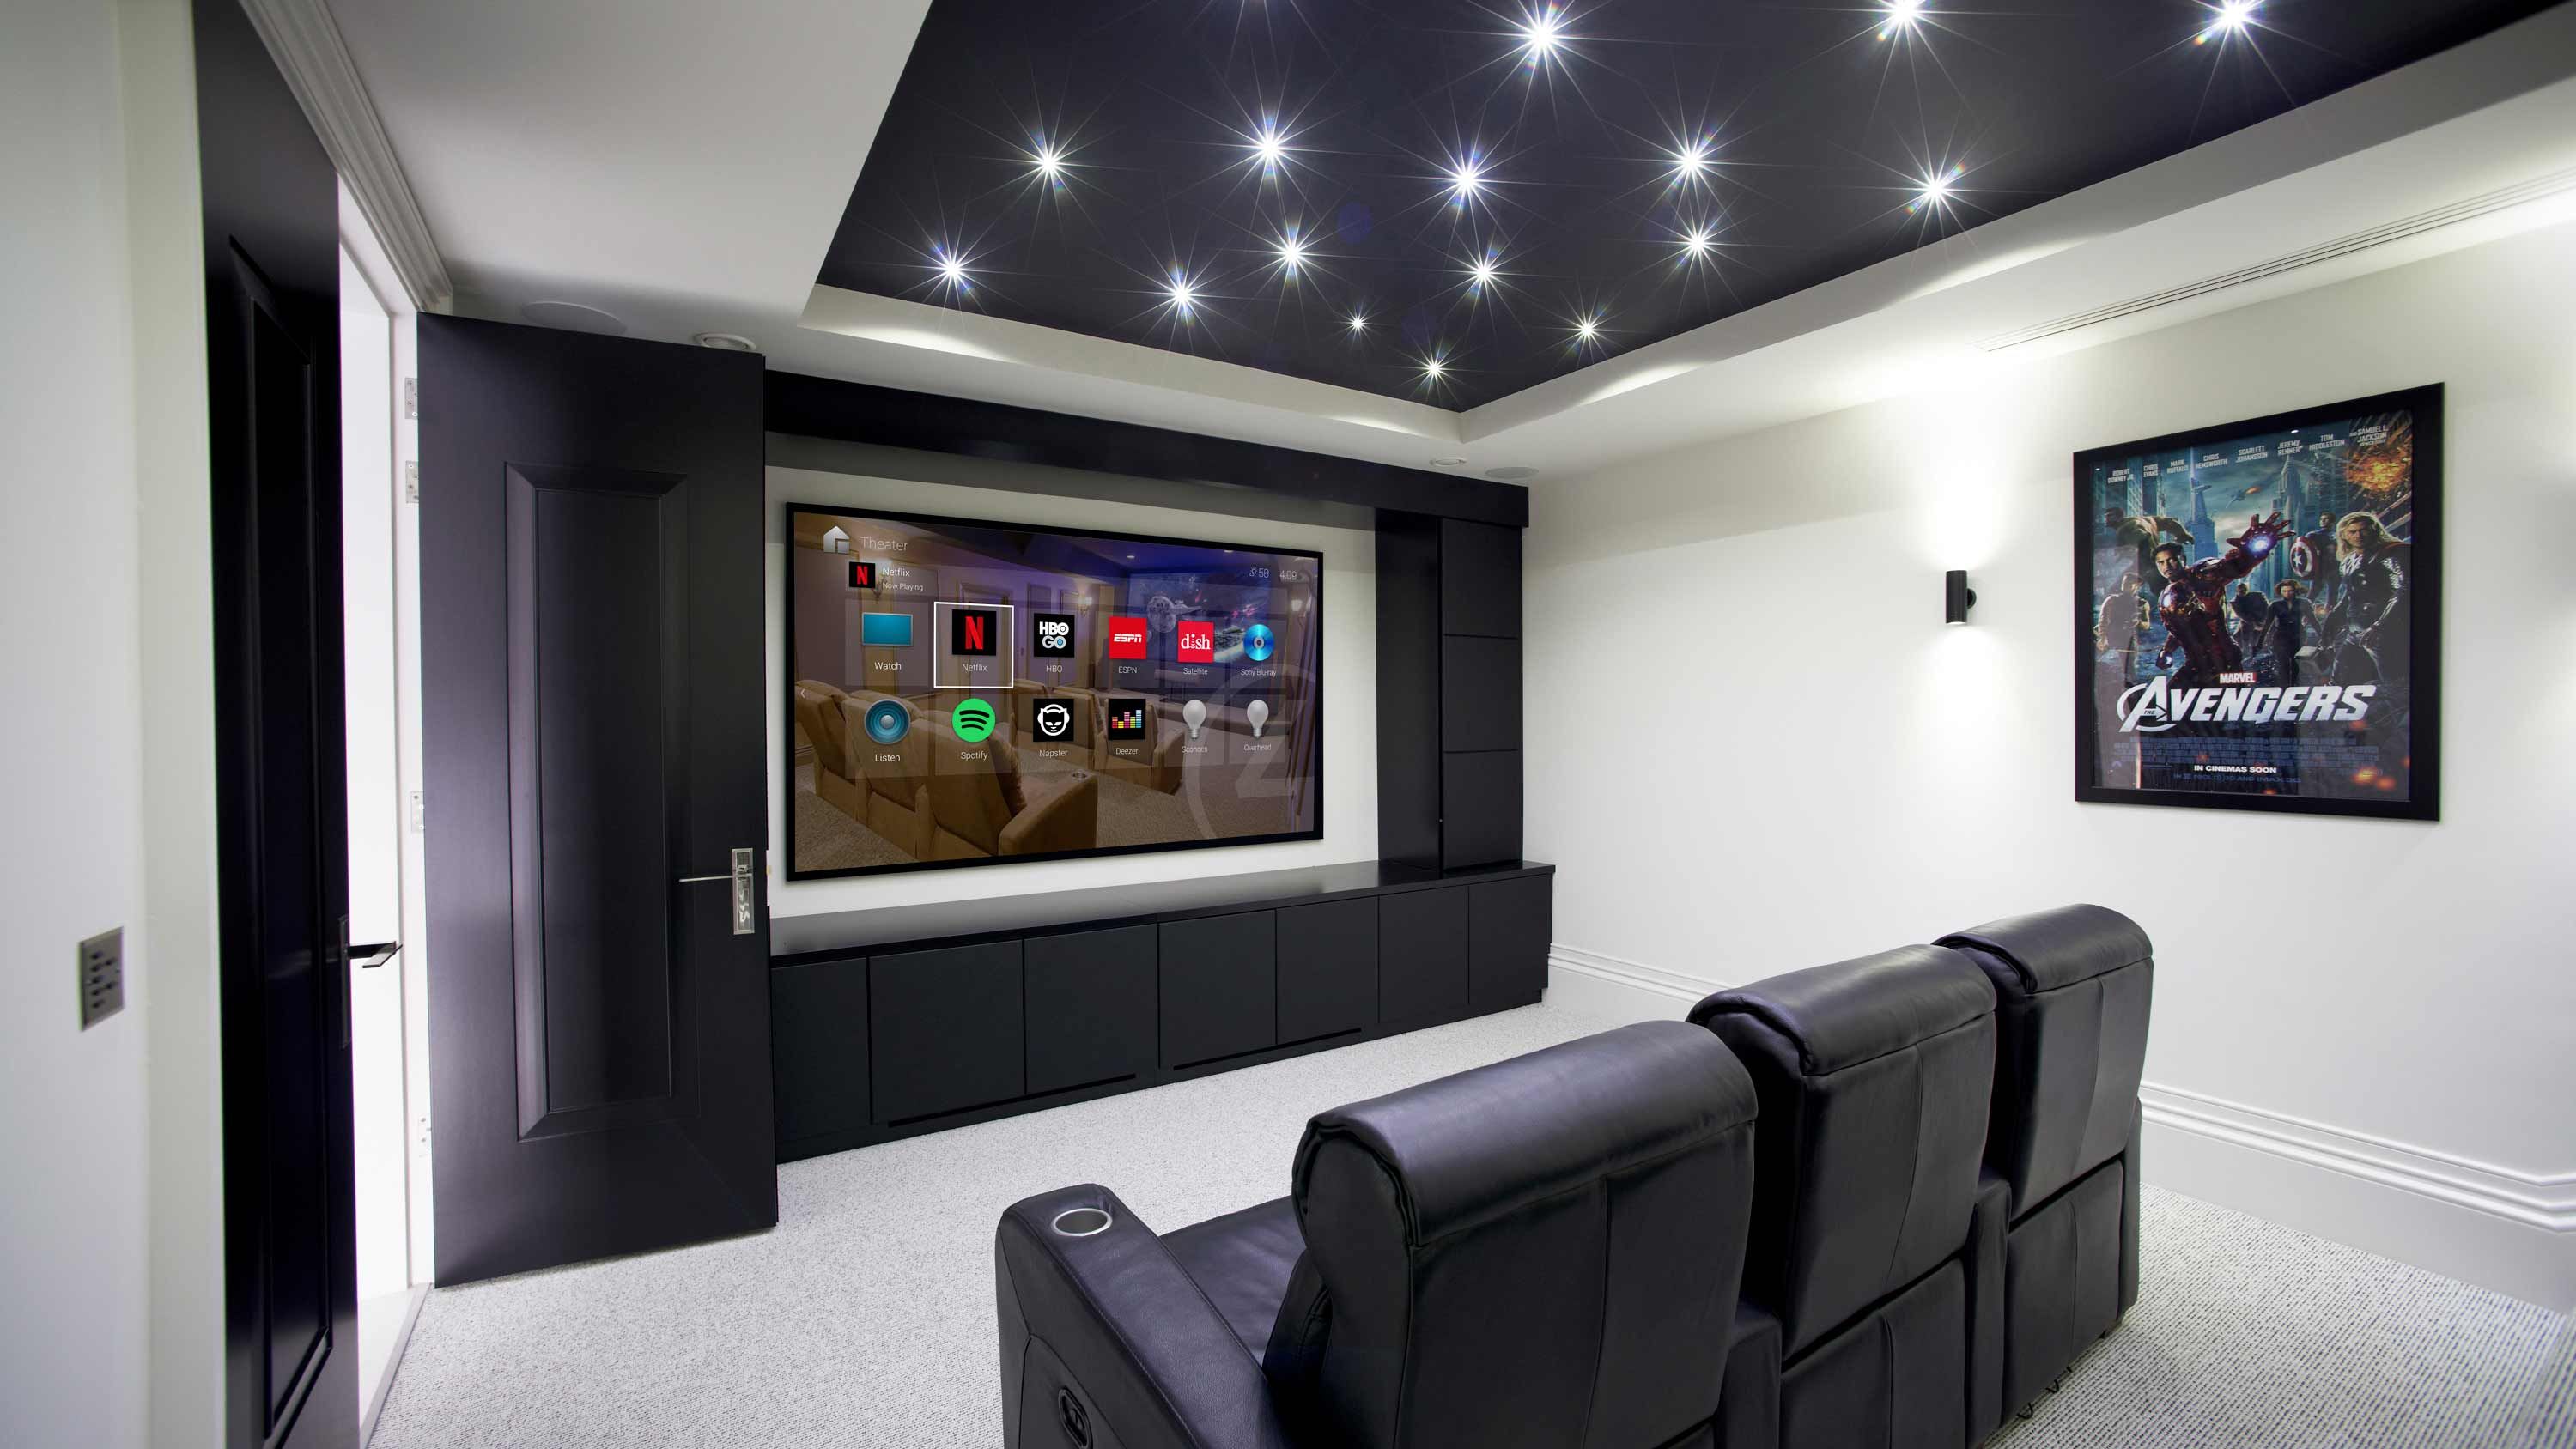 Control4 Dealer Austin, TX, home control, indoor automation, home automation, dedicated home theater, home theater,, smart home control4